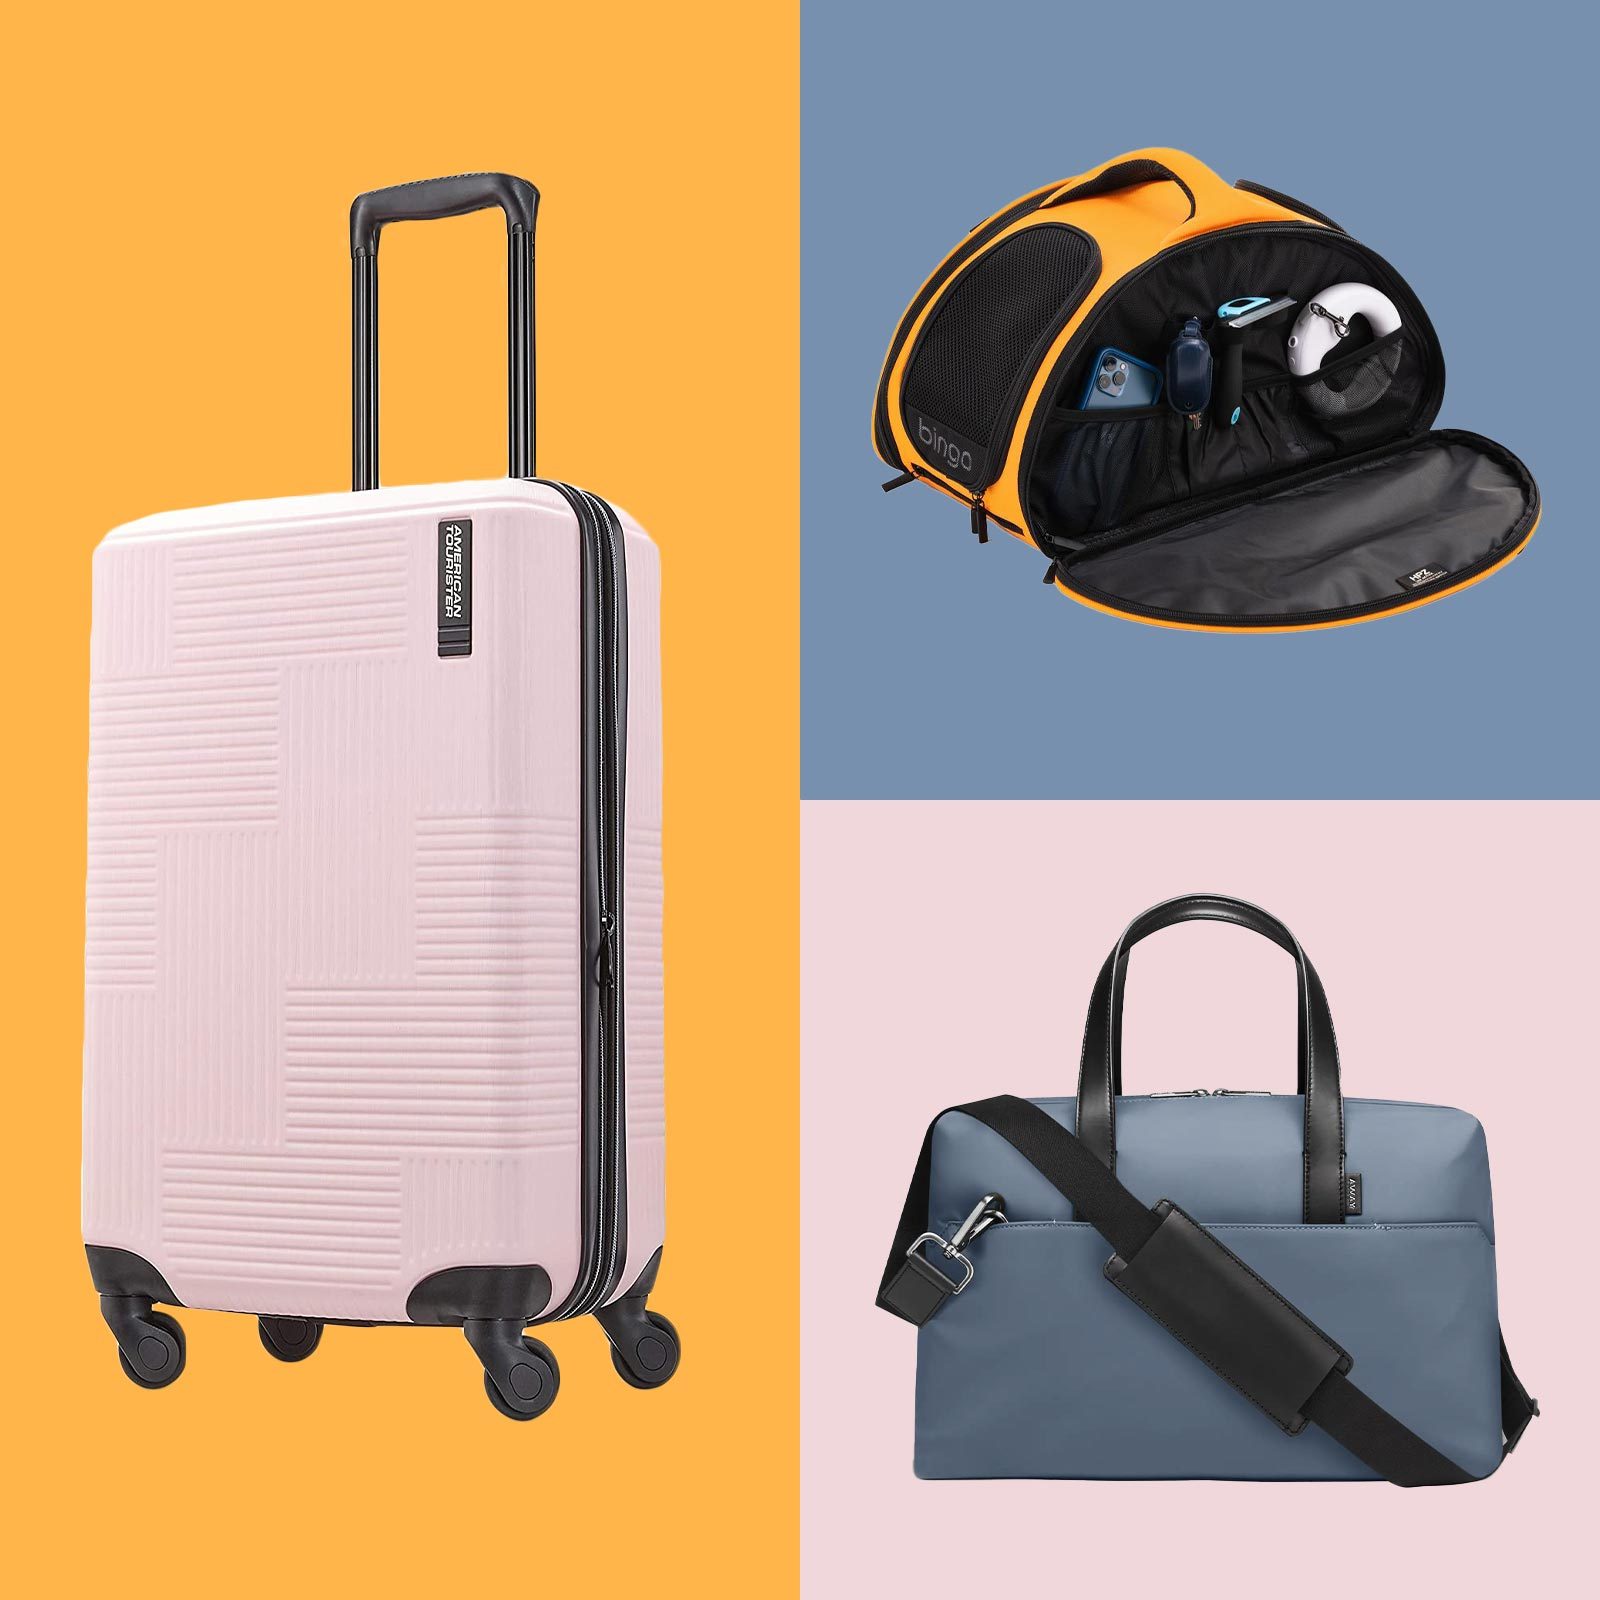 Luggage: Shop Suitcases & Travel Bags For Your Next Getaway